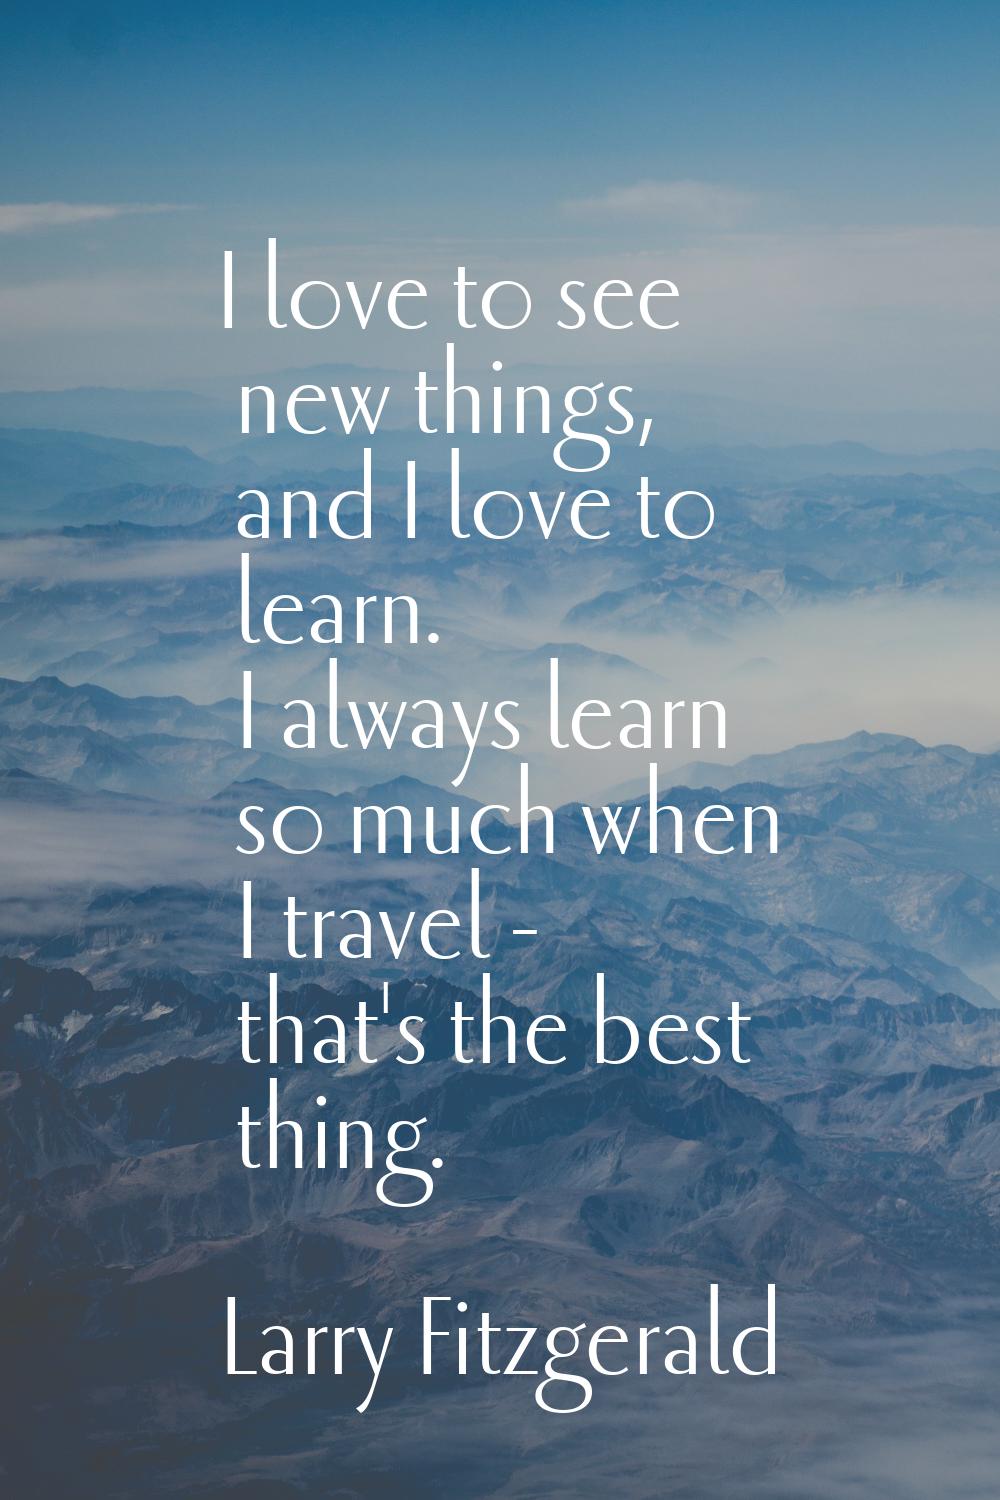 I love to see new things, and I love to learn. I always learn so much when I travel - that's the be